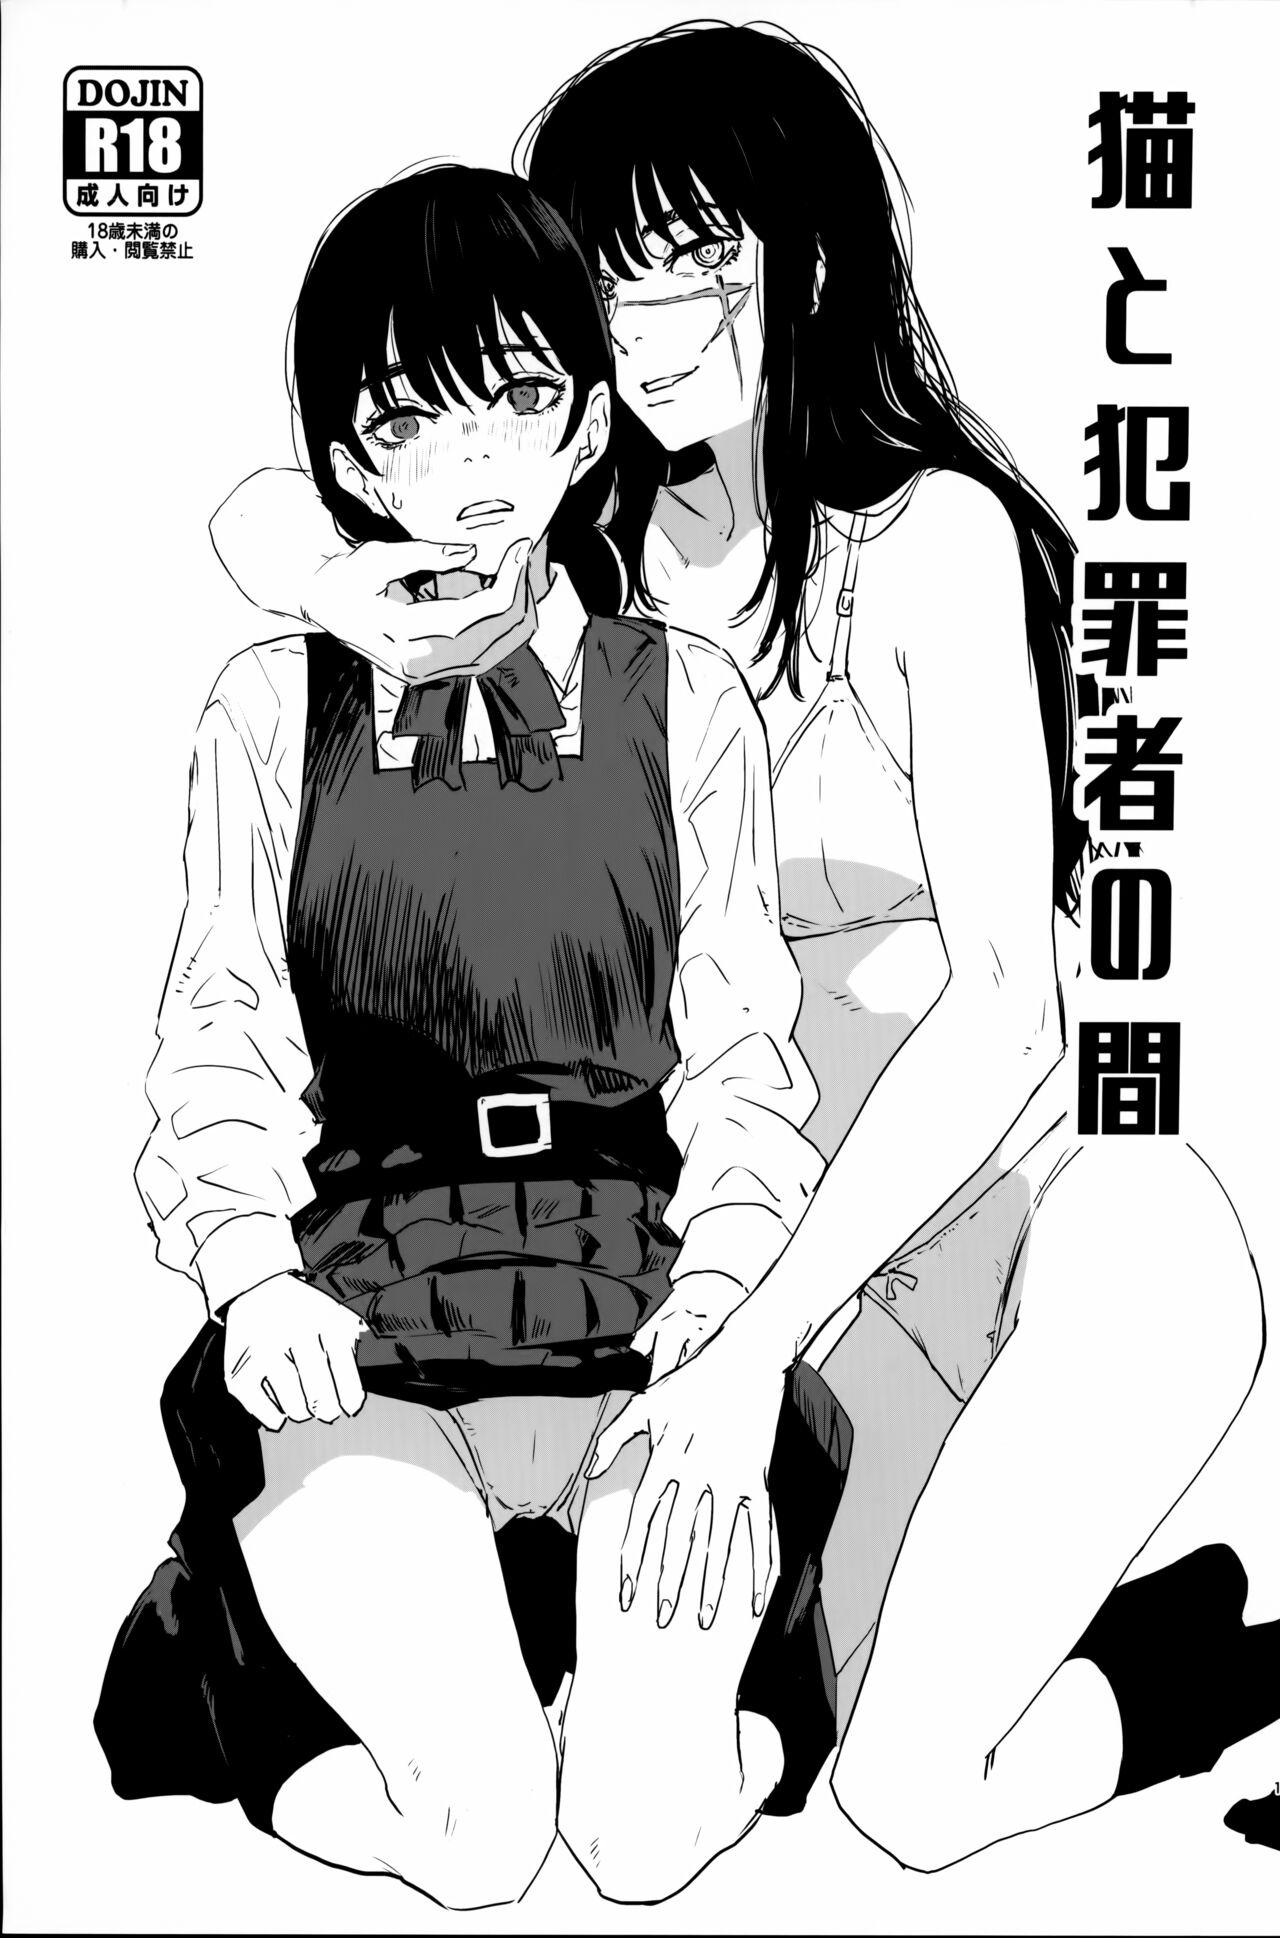 Anus 猫と犯罪者の間 - Chainsaw man Swallowing - Page 1